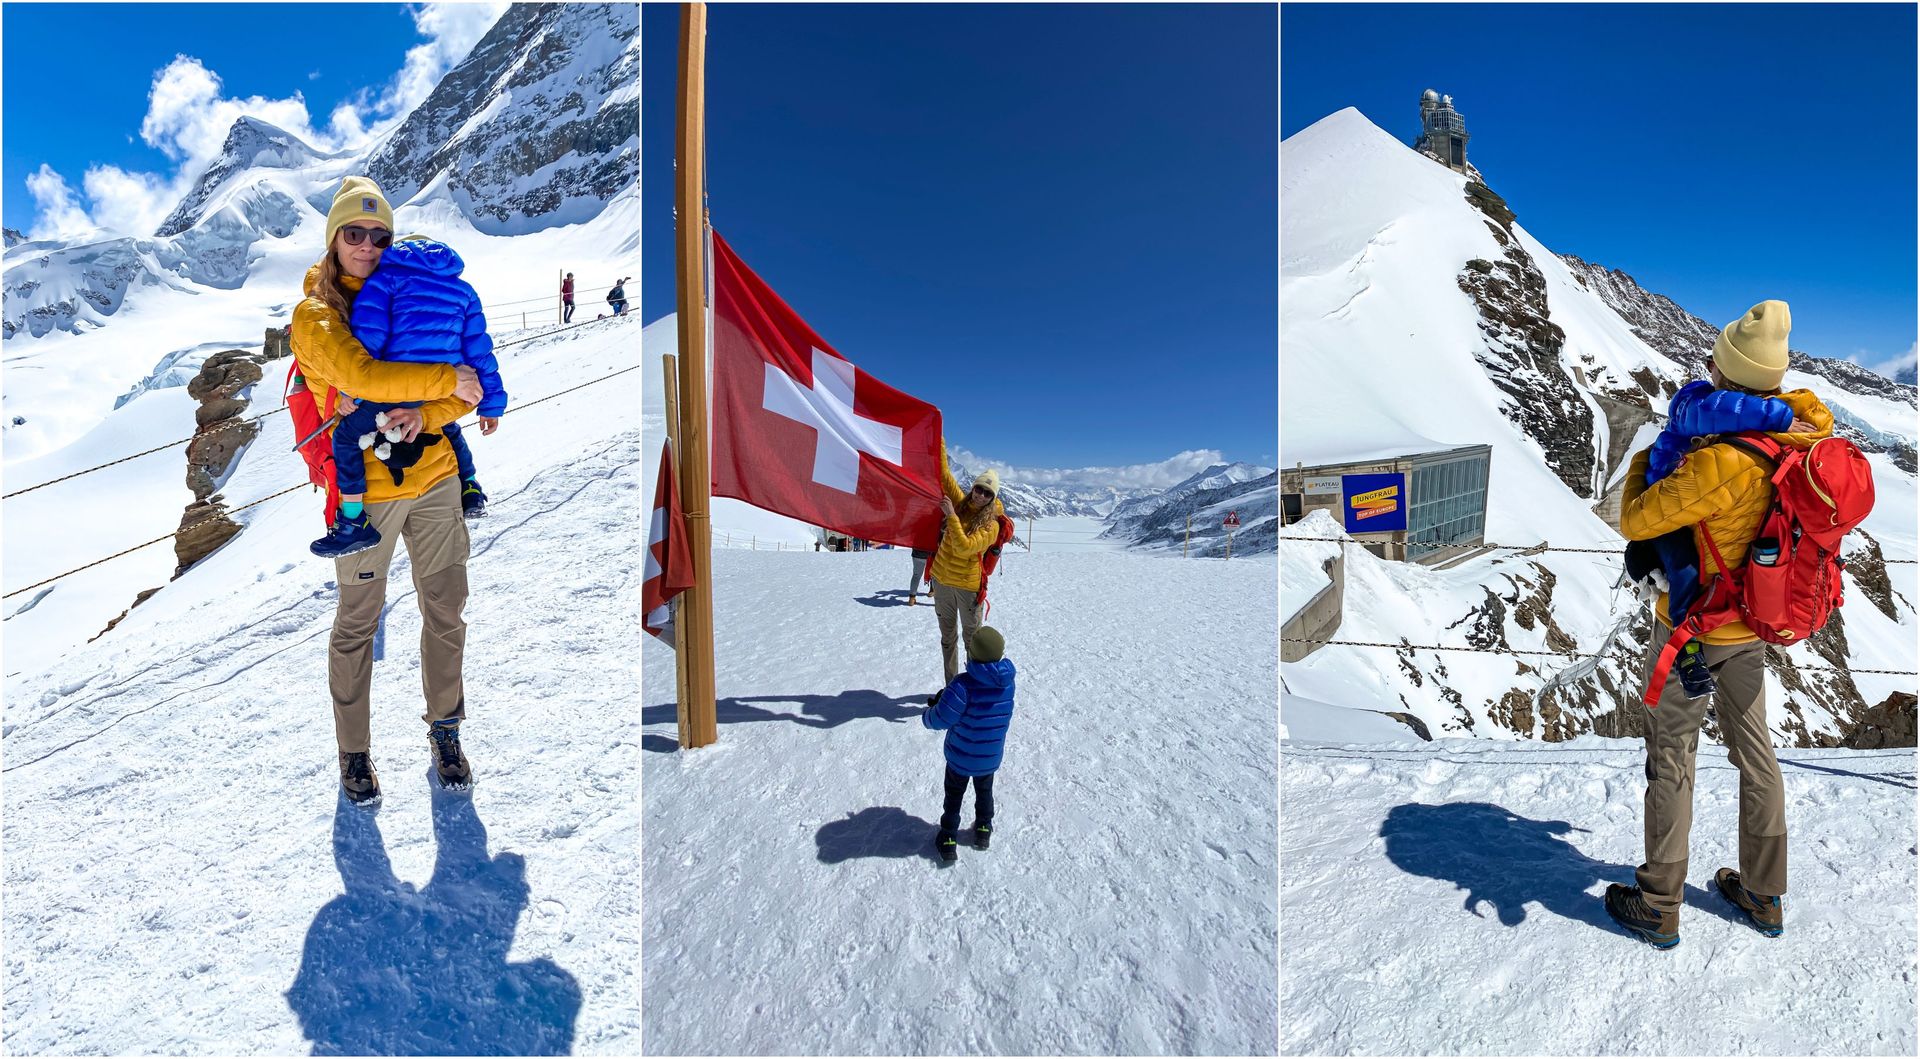 A trip to Jungfraujoch top of Europe - you need to know that – image 5